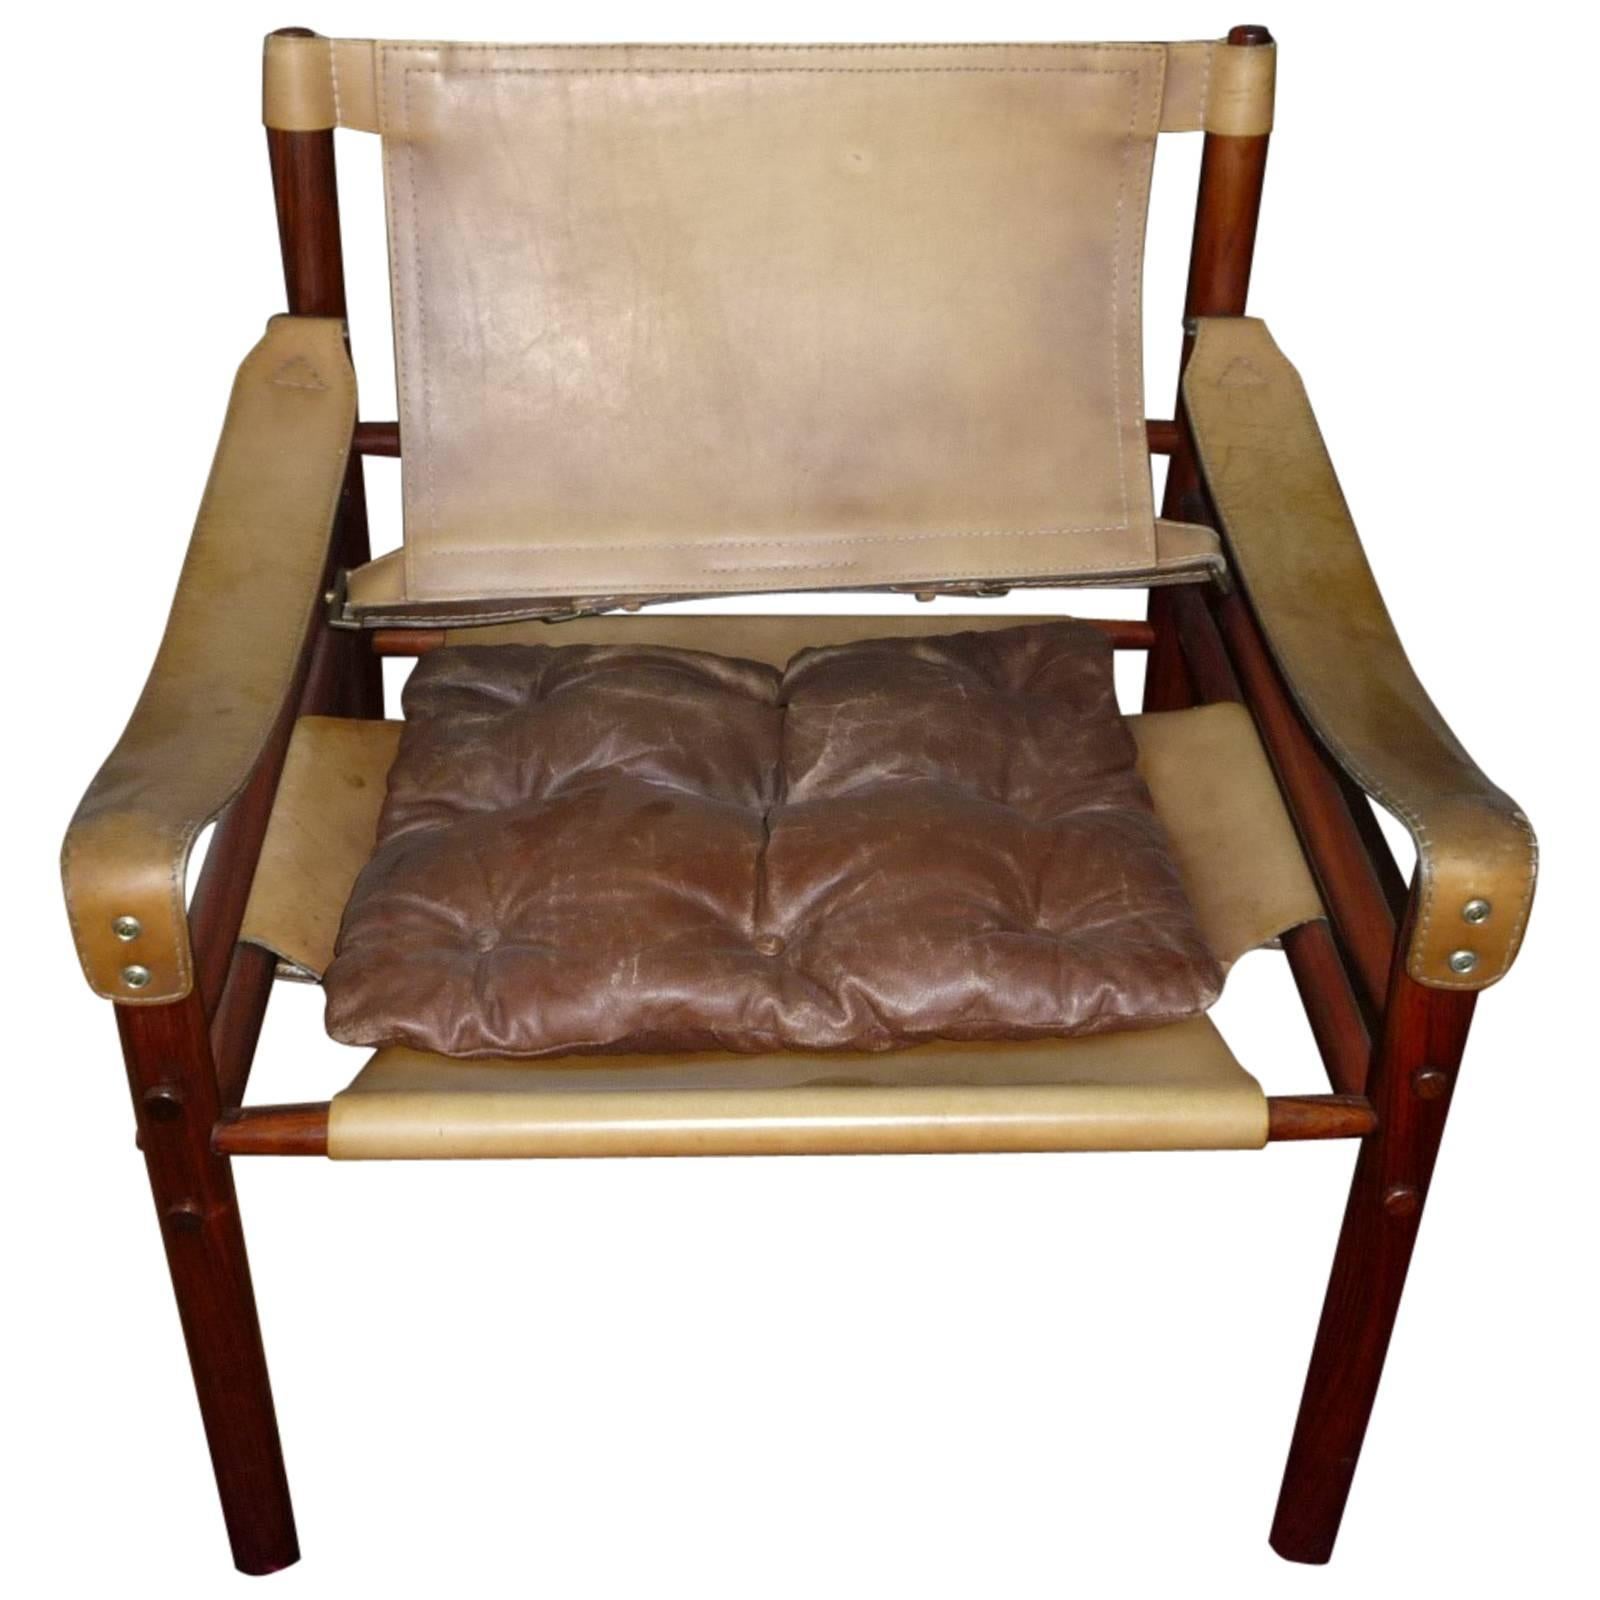 Arne Norell Sirocco Safari Lounge Chair, Rio Rosewood and Leather, 1960s, Danish For Sale